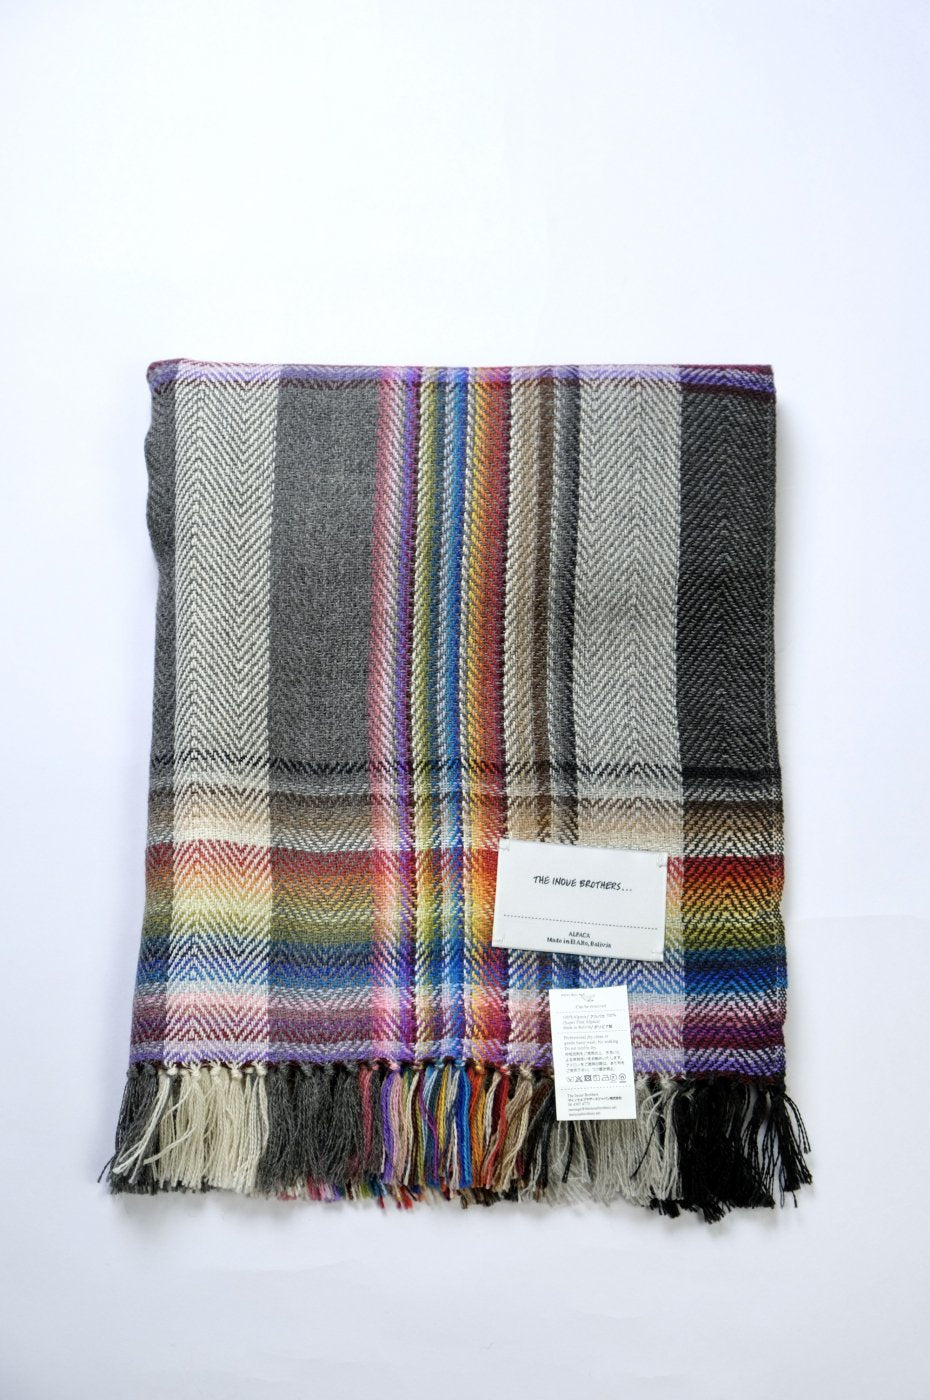 THE INOUE BROTHERS... "Multi Coloured Scarf/GREY"